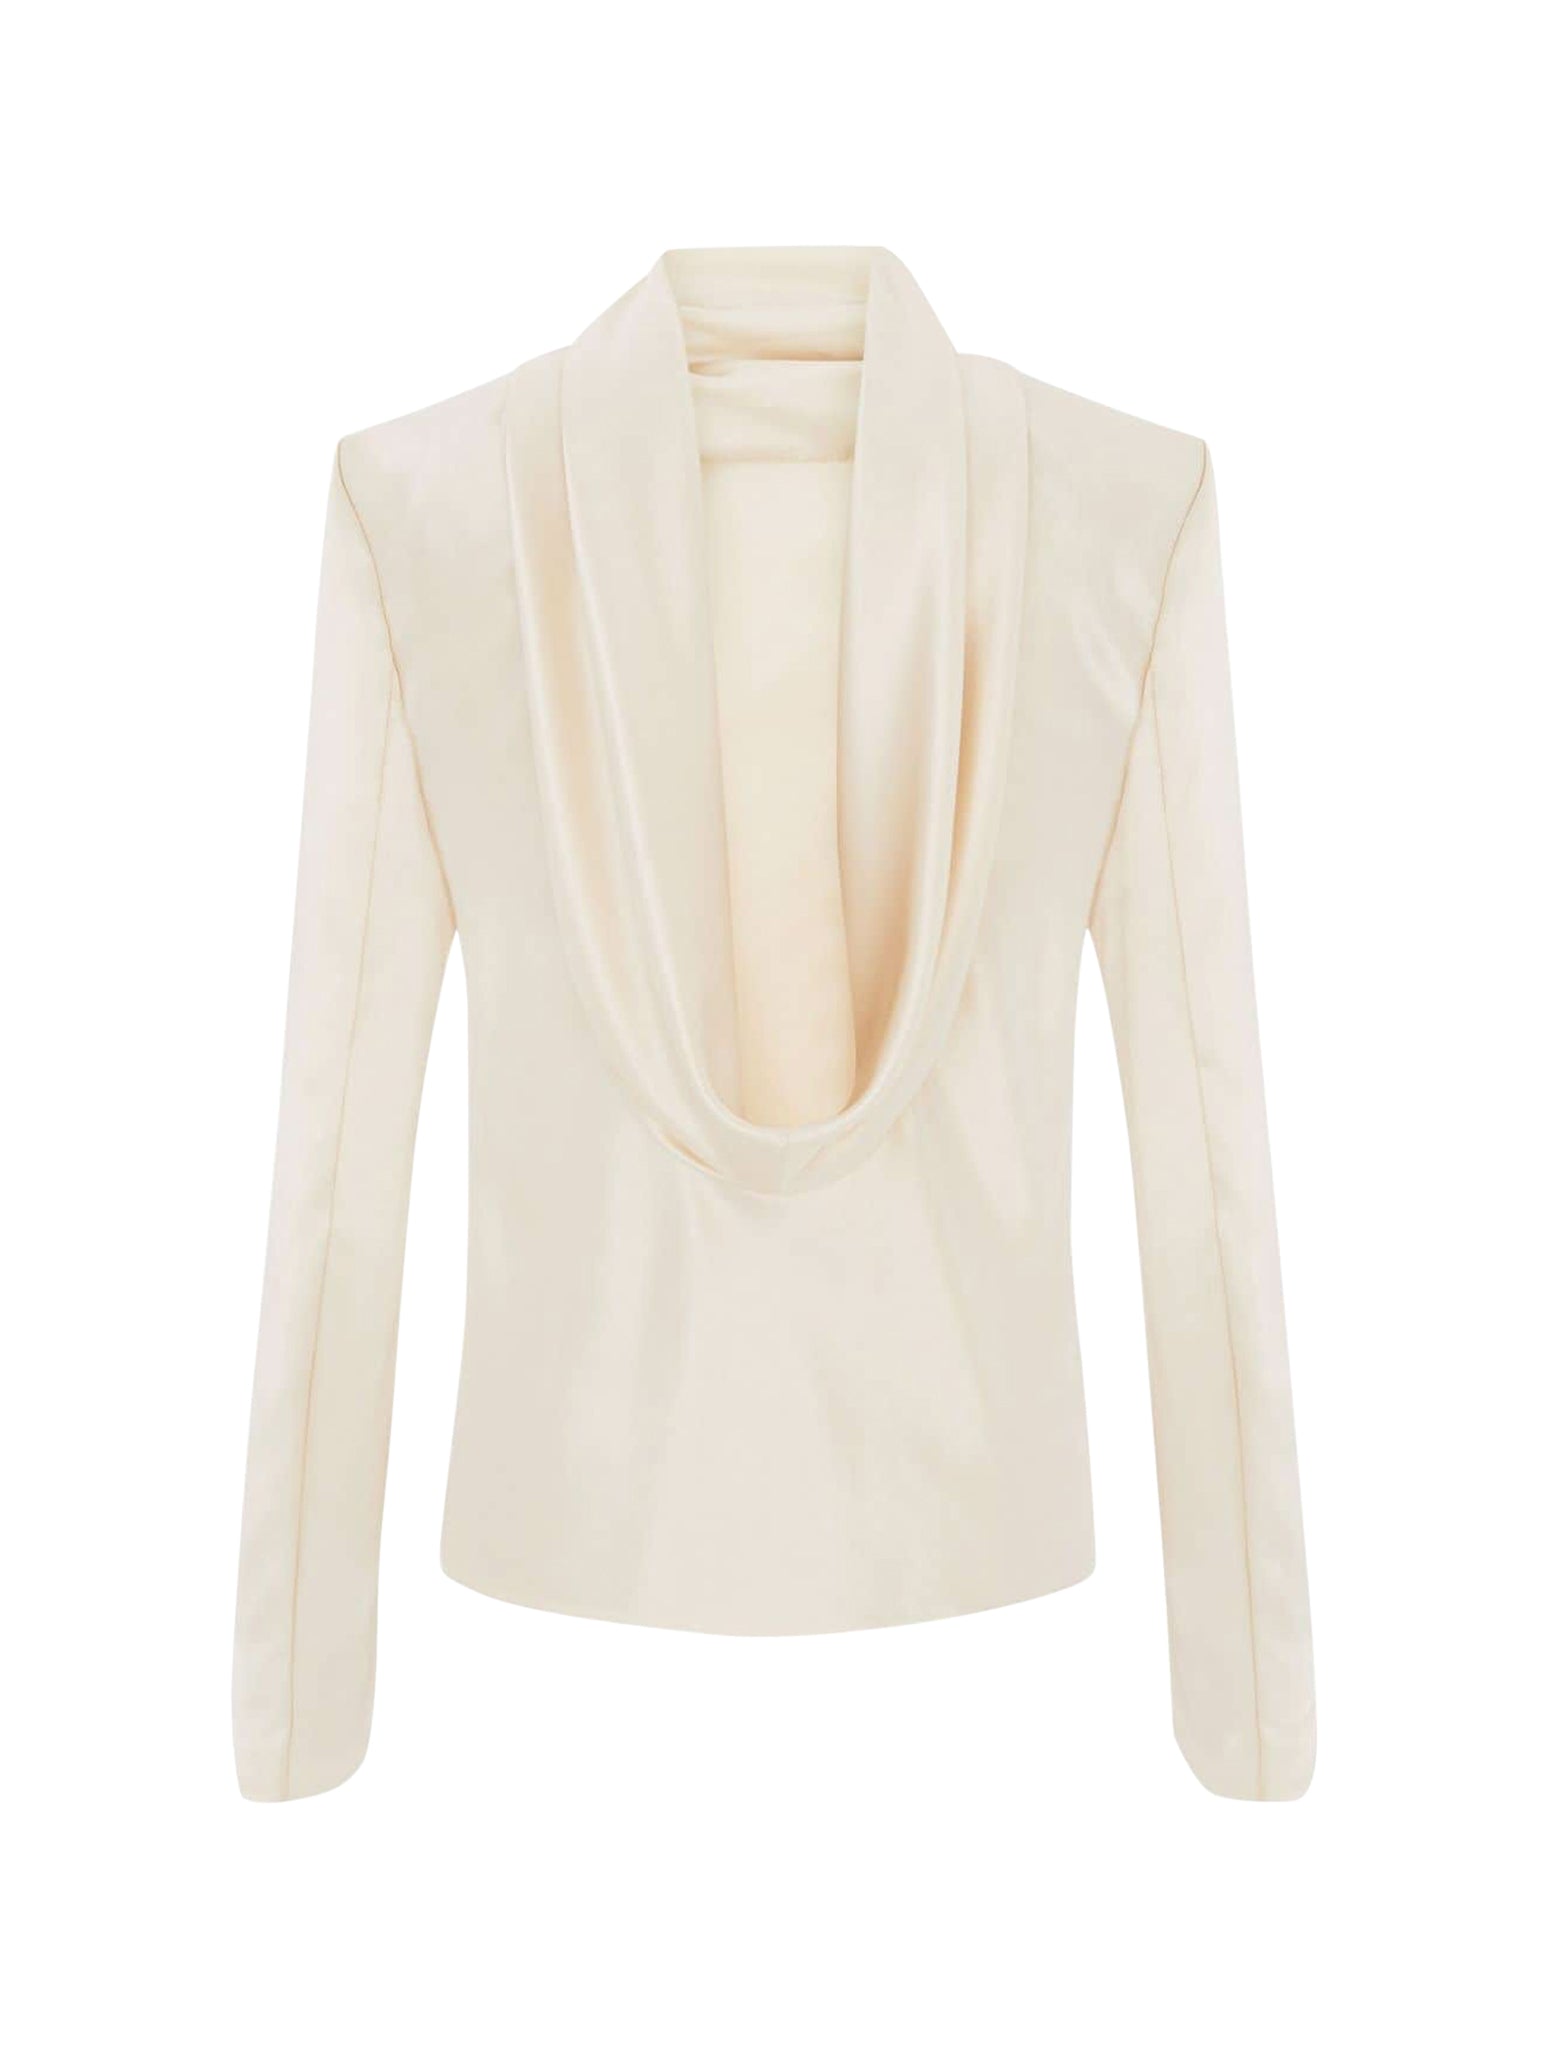 BLOUSE WITH HOODED BACK COLLAR IN SILK CREPE SATIN